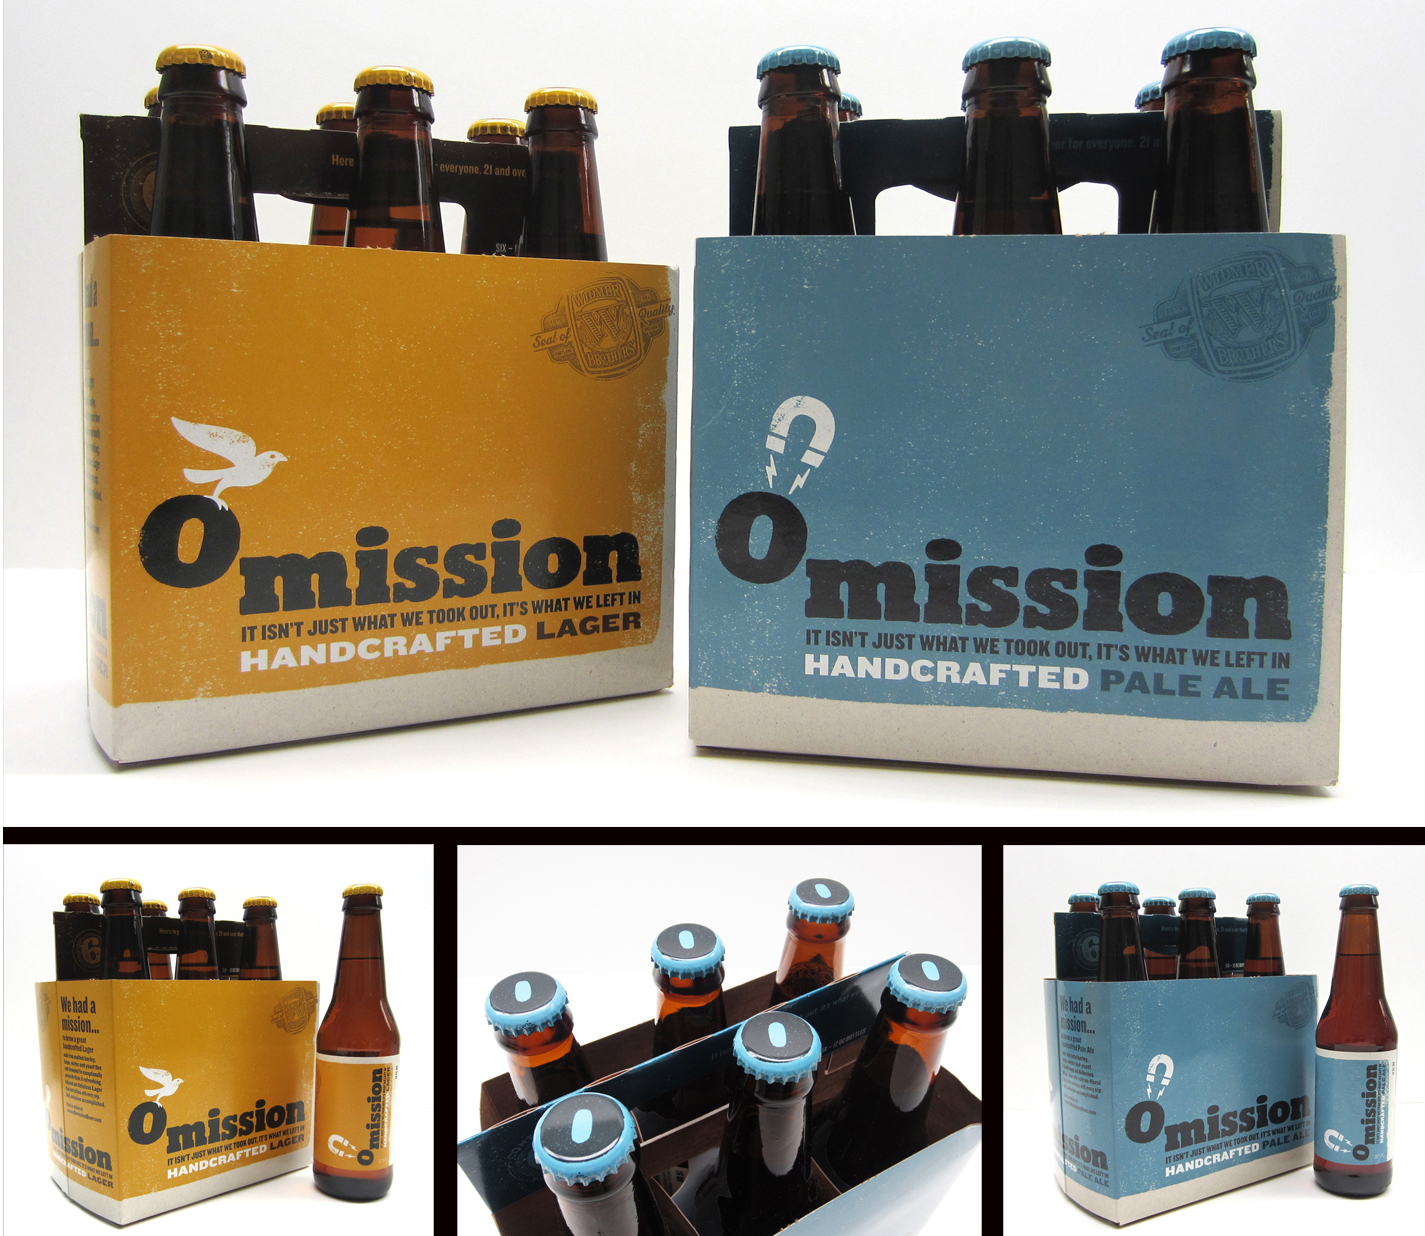 Omission craft beer uses design to show what's in and what out